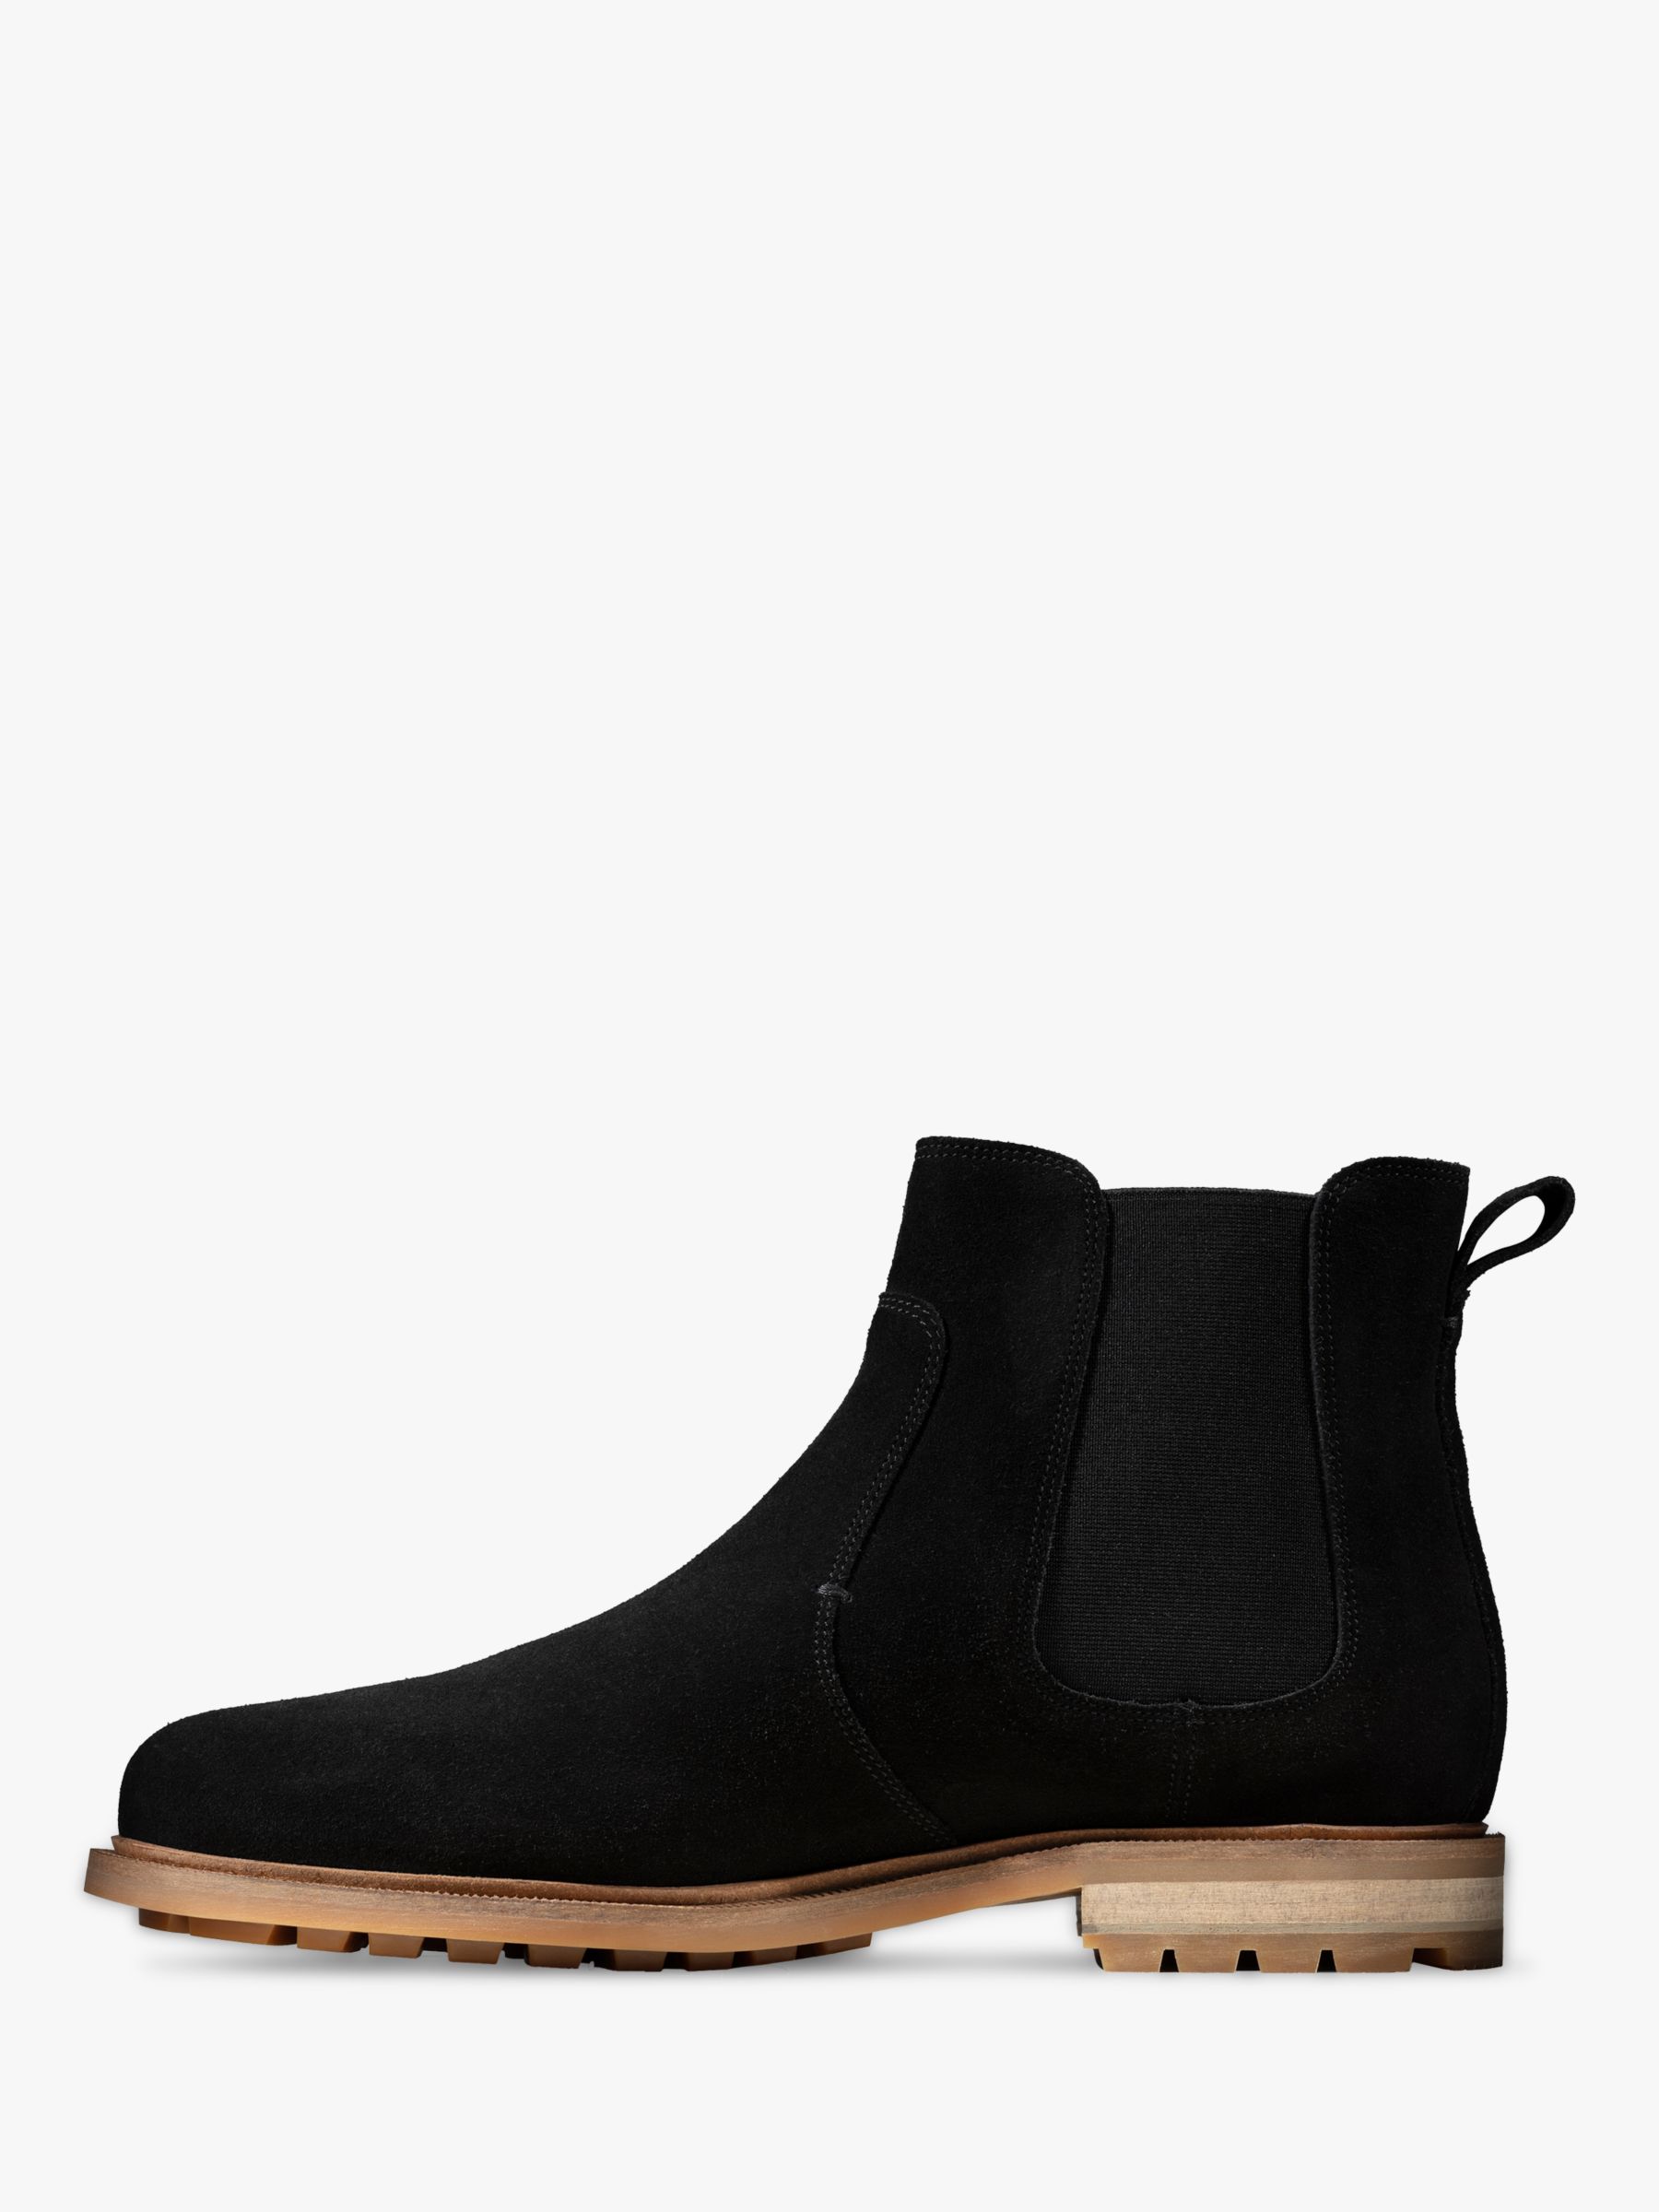 Clarks Foxwell Suede Chelsea Boots